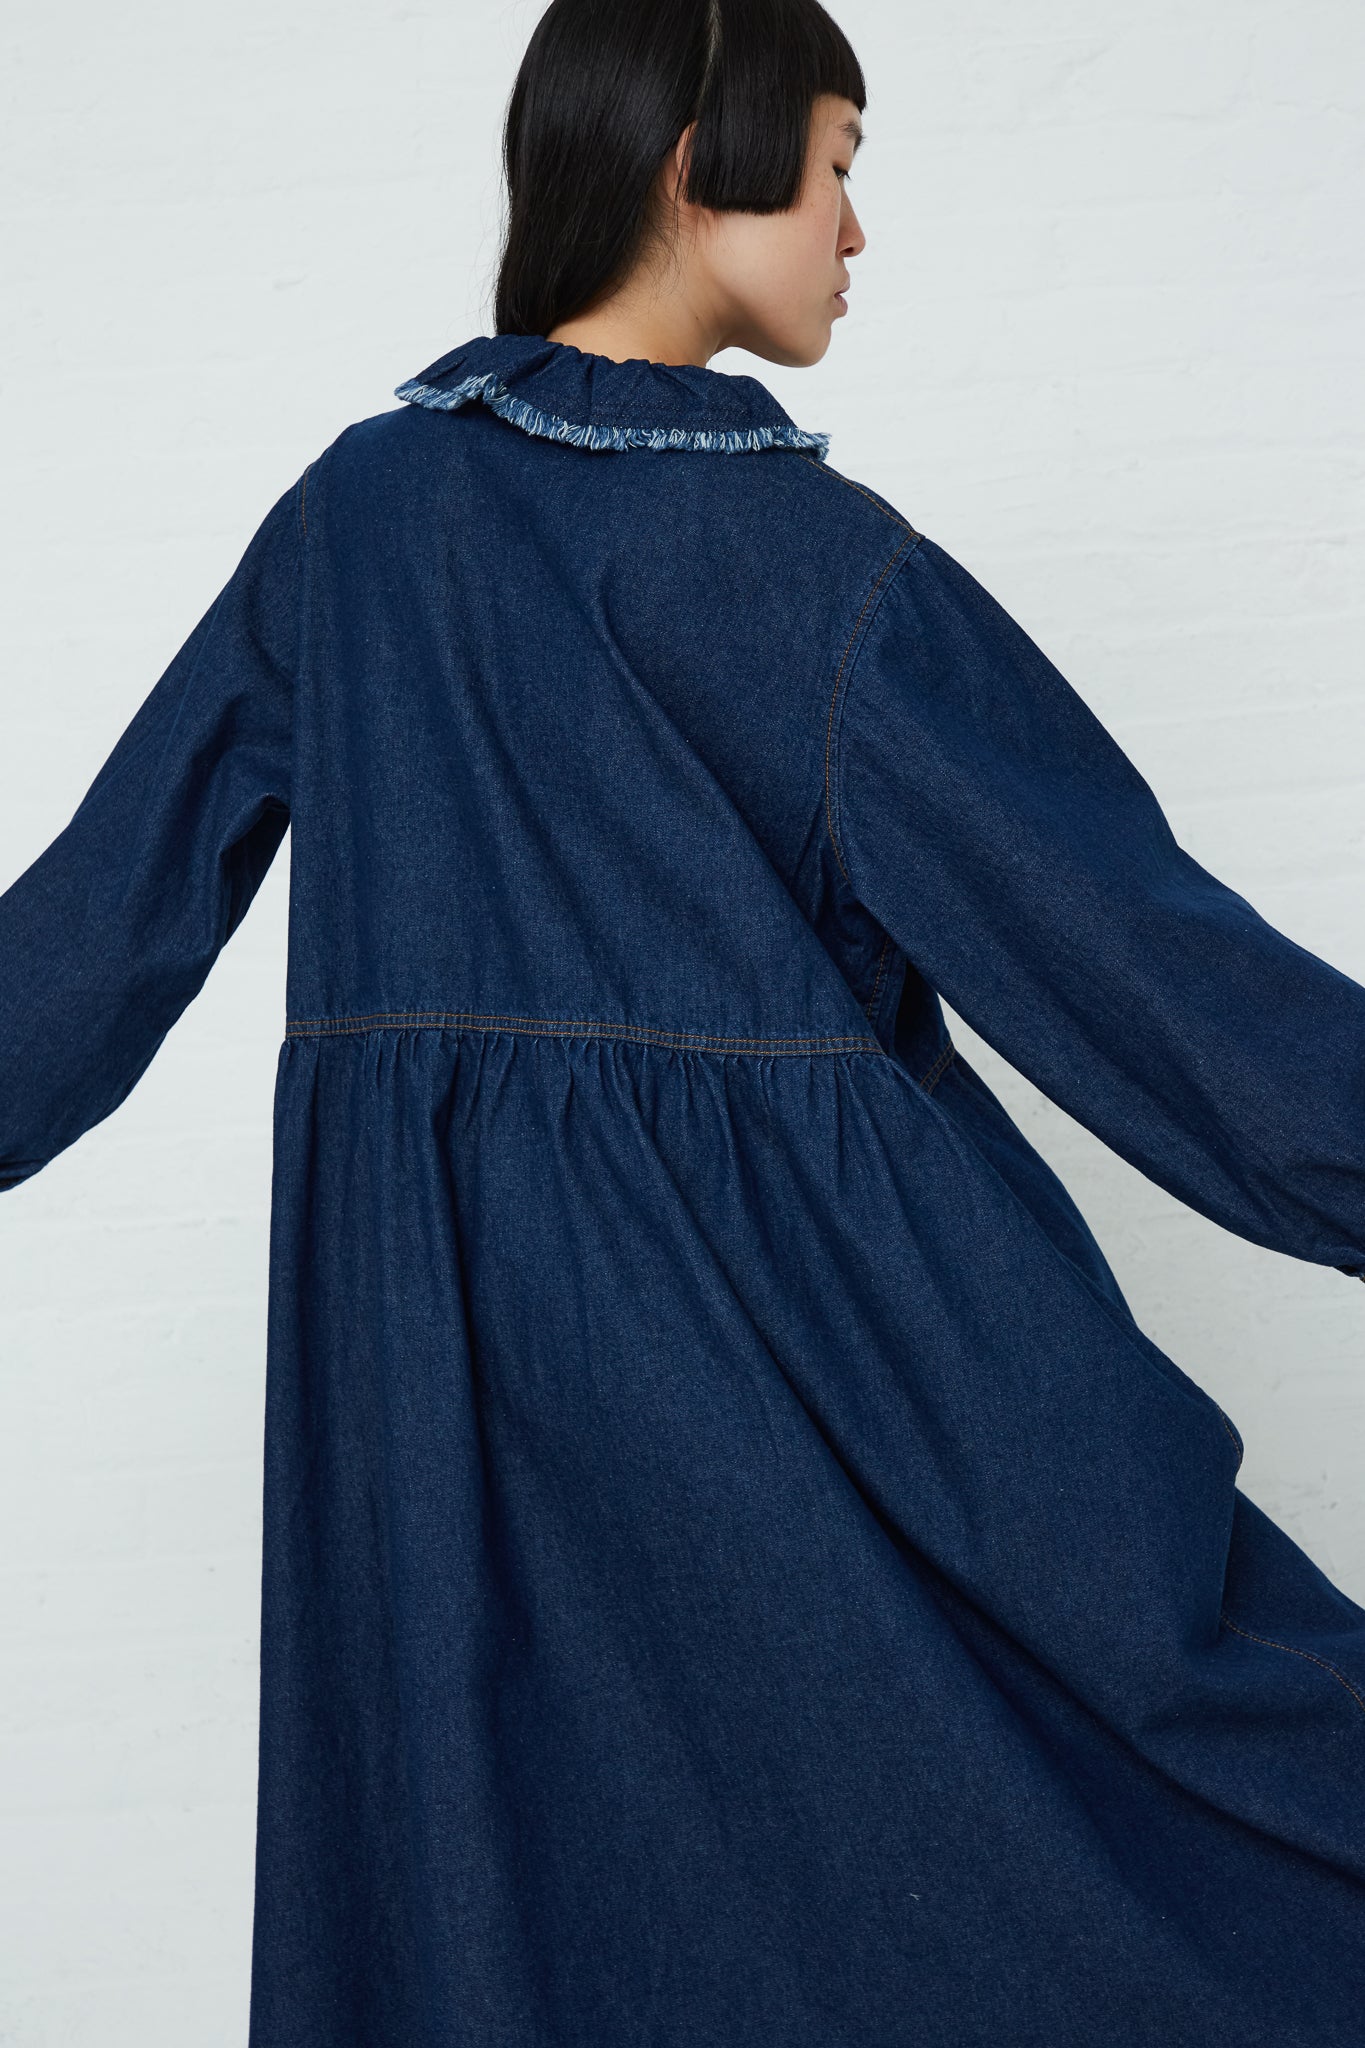 A woman is wearing an Ichi Cotton Collar Dress in Dark Indigo with a ruffled hem and long sleeves.